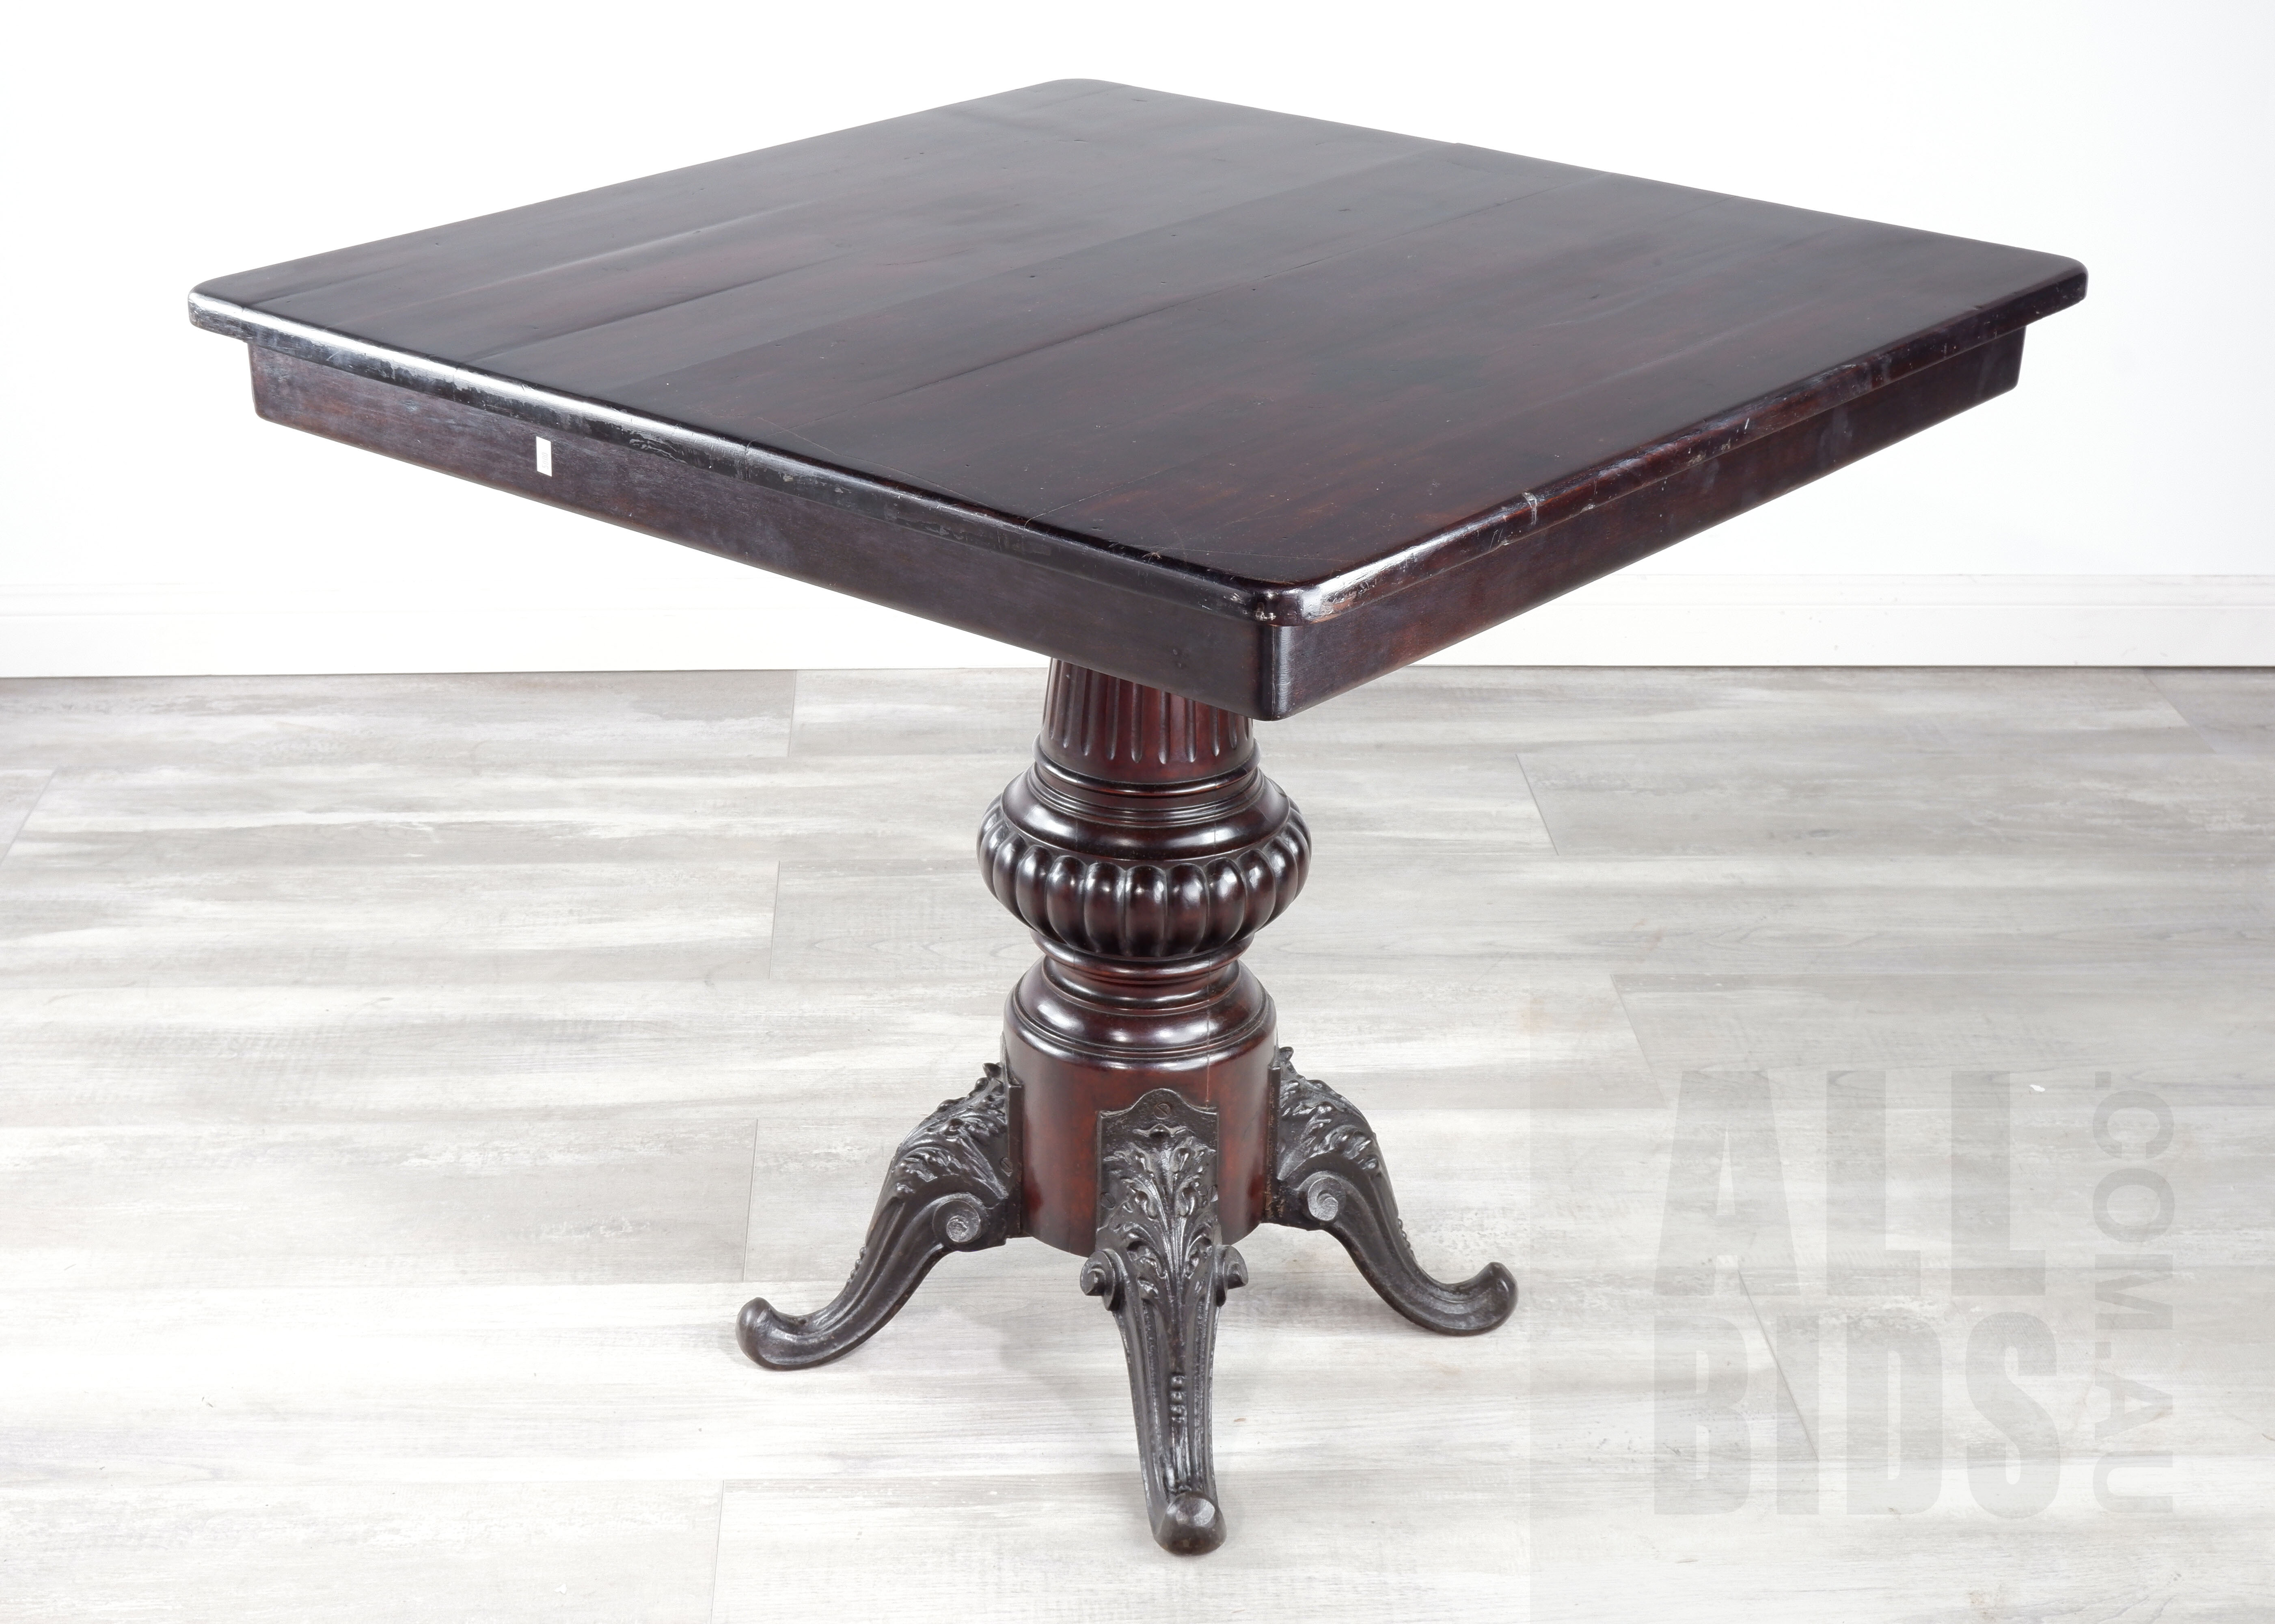 'Rare Antique American Philip Strobel & Sons Mahogany Table on Profusely Carved Column with Four Cast Iron Scroll Feet, Late 19th Century'